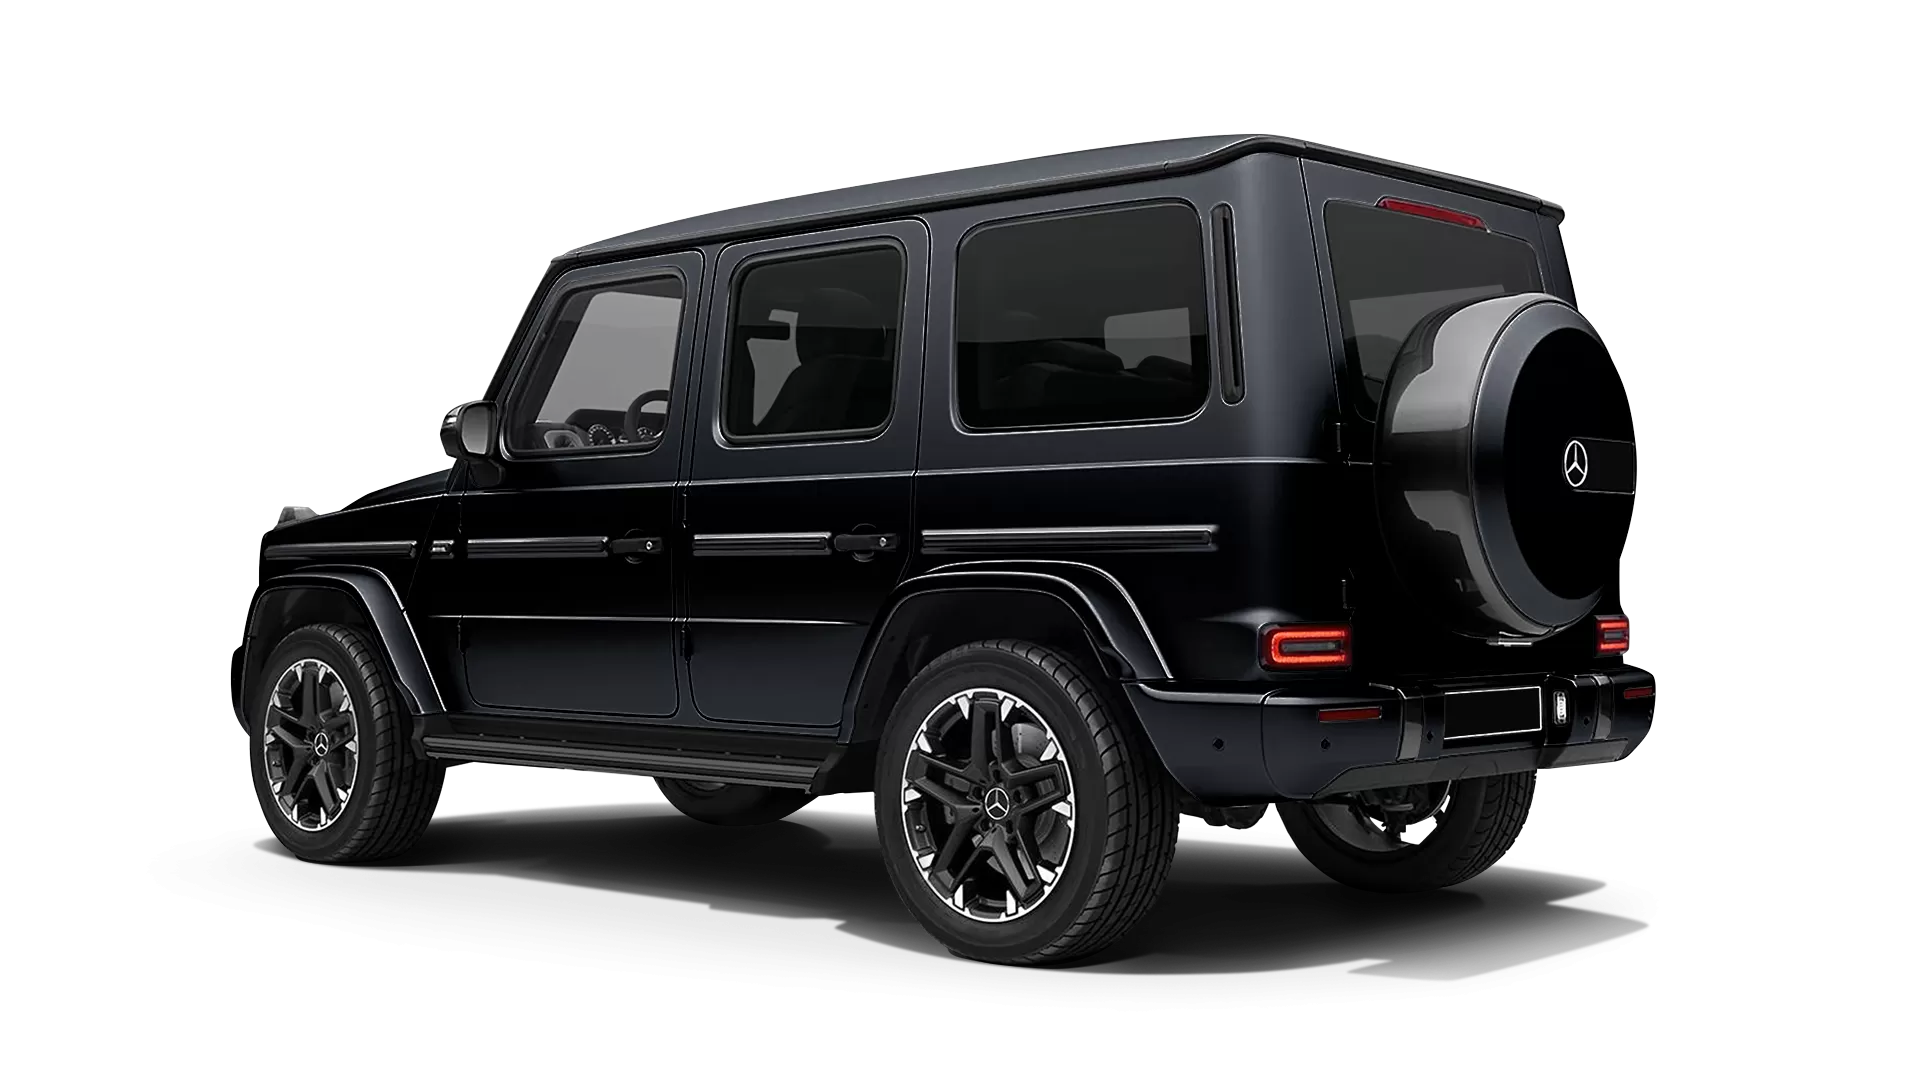 Mercedes G class W463 stock rear view in Night Black color